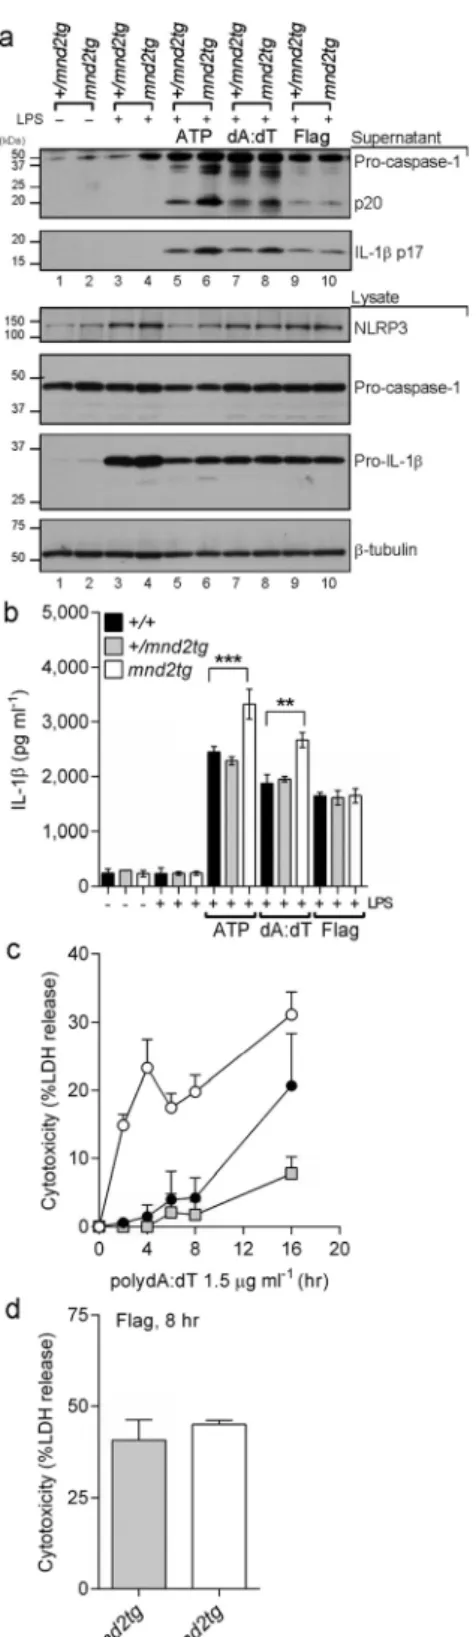 Figure 2.  HtrA2 protease activity inhibits the AIM2 but not NLRC4 inflammasome. (a,b) LPS-primed mnd2tg 